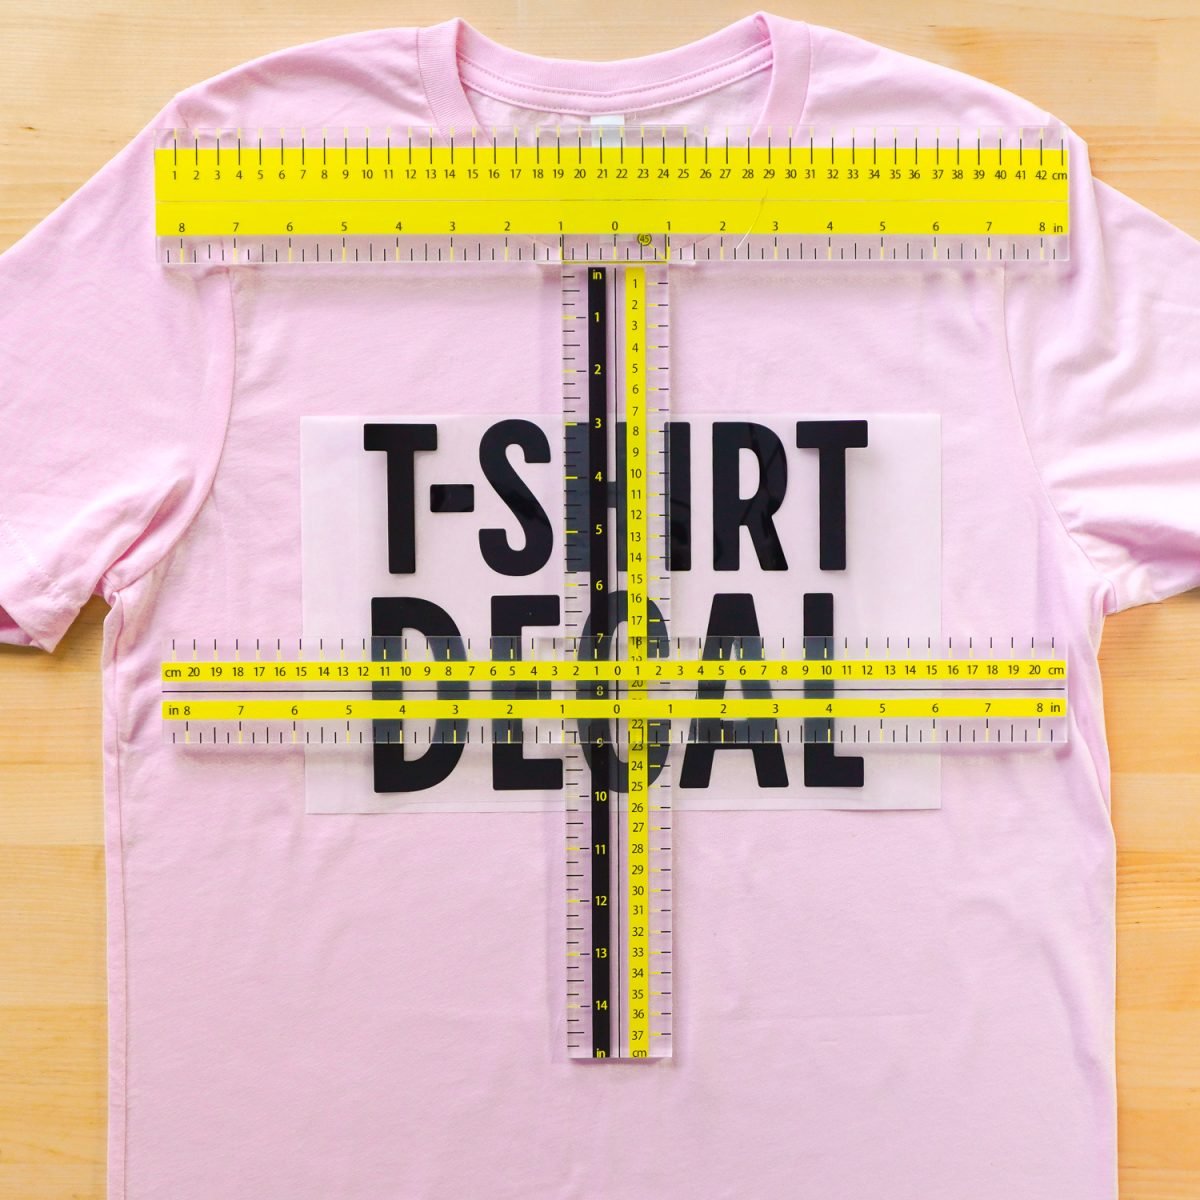 Pink t-shirt with decal and UPTTHOW ruler